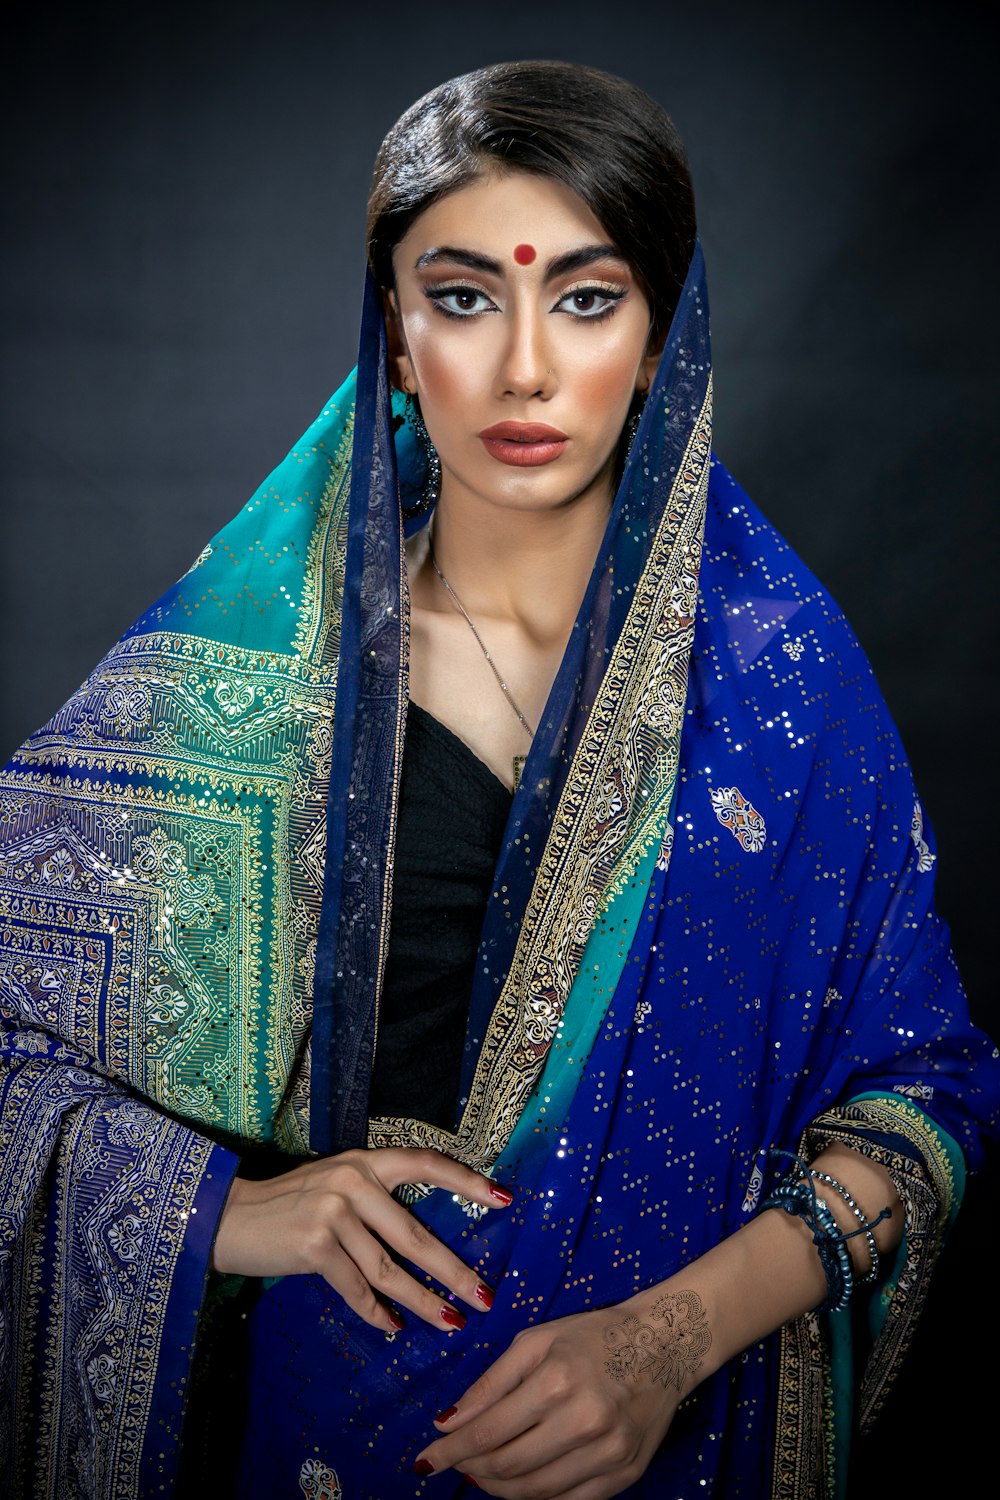 a woman wearing a blue and green sari